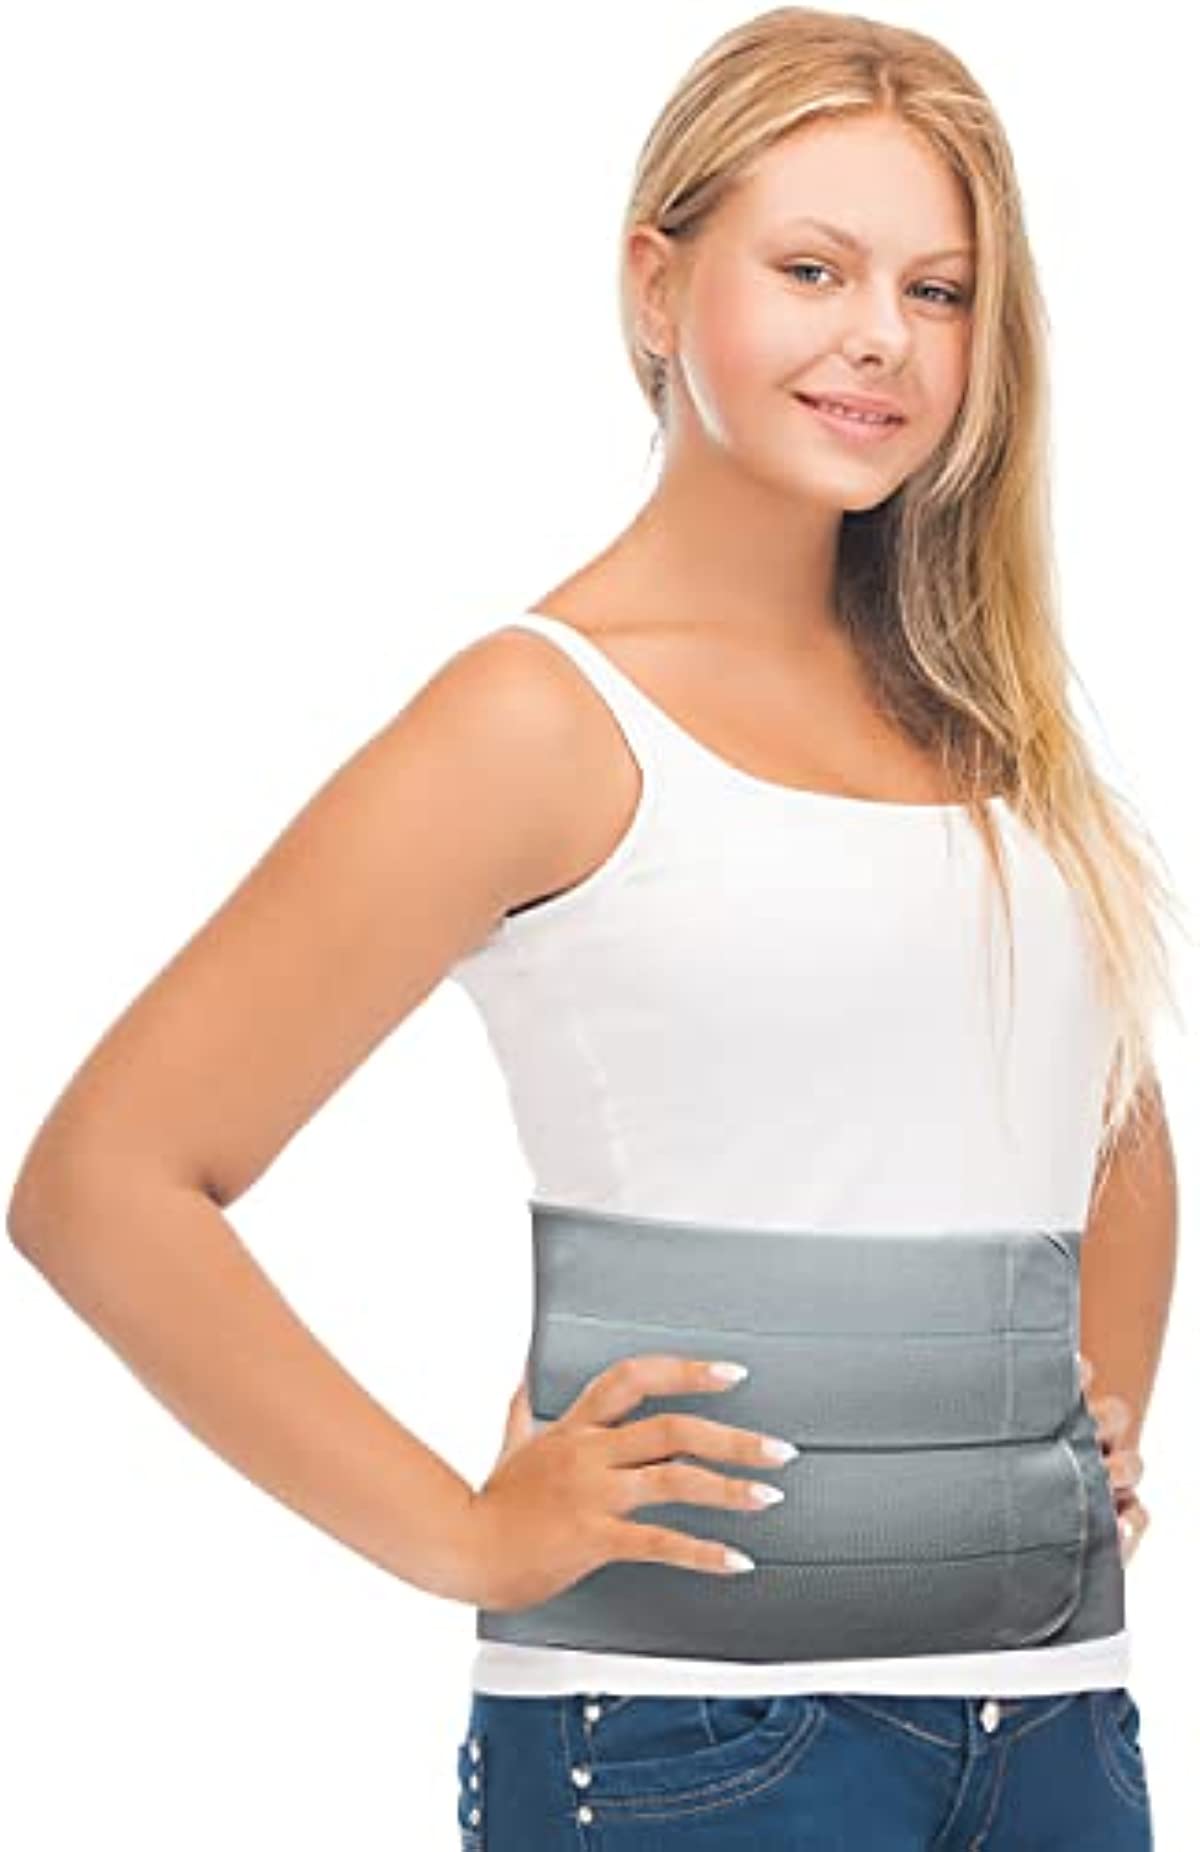 Abdominal Binder Post Surgery for Men and Women, Postpartum Tummy Tuck Belt Provides Slimming Bariatric Stomach Compression,High Elasticity, Breathable - (30\" - 45\") 4 Panel - 12\"